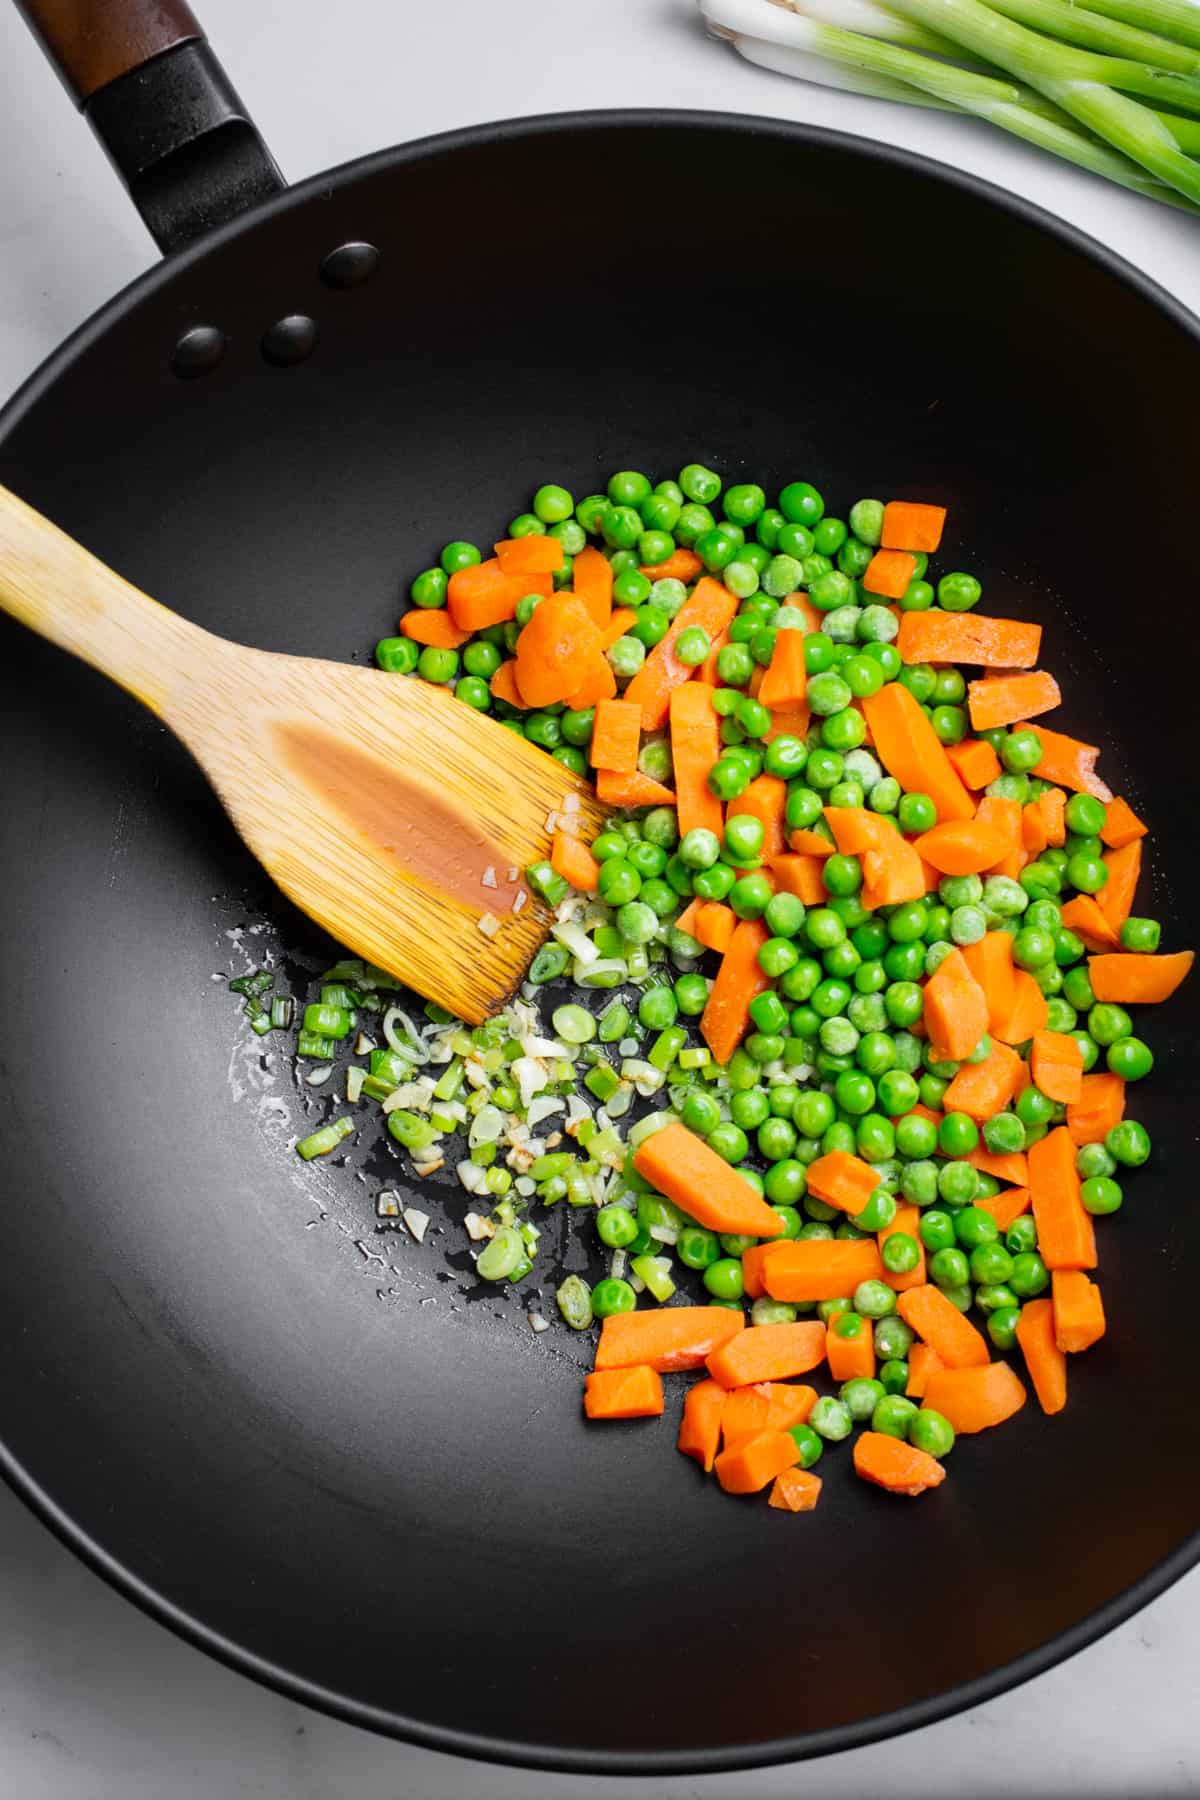 Frozen peas and carrots, garlic, and green onions in a wok.